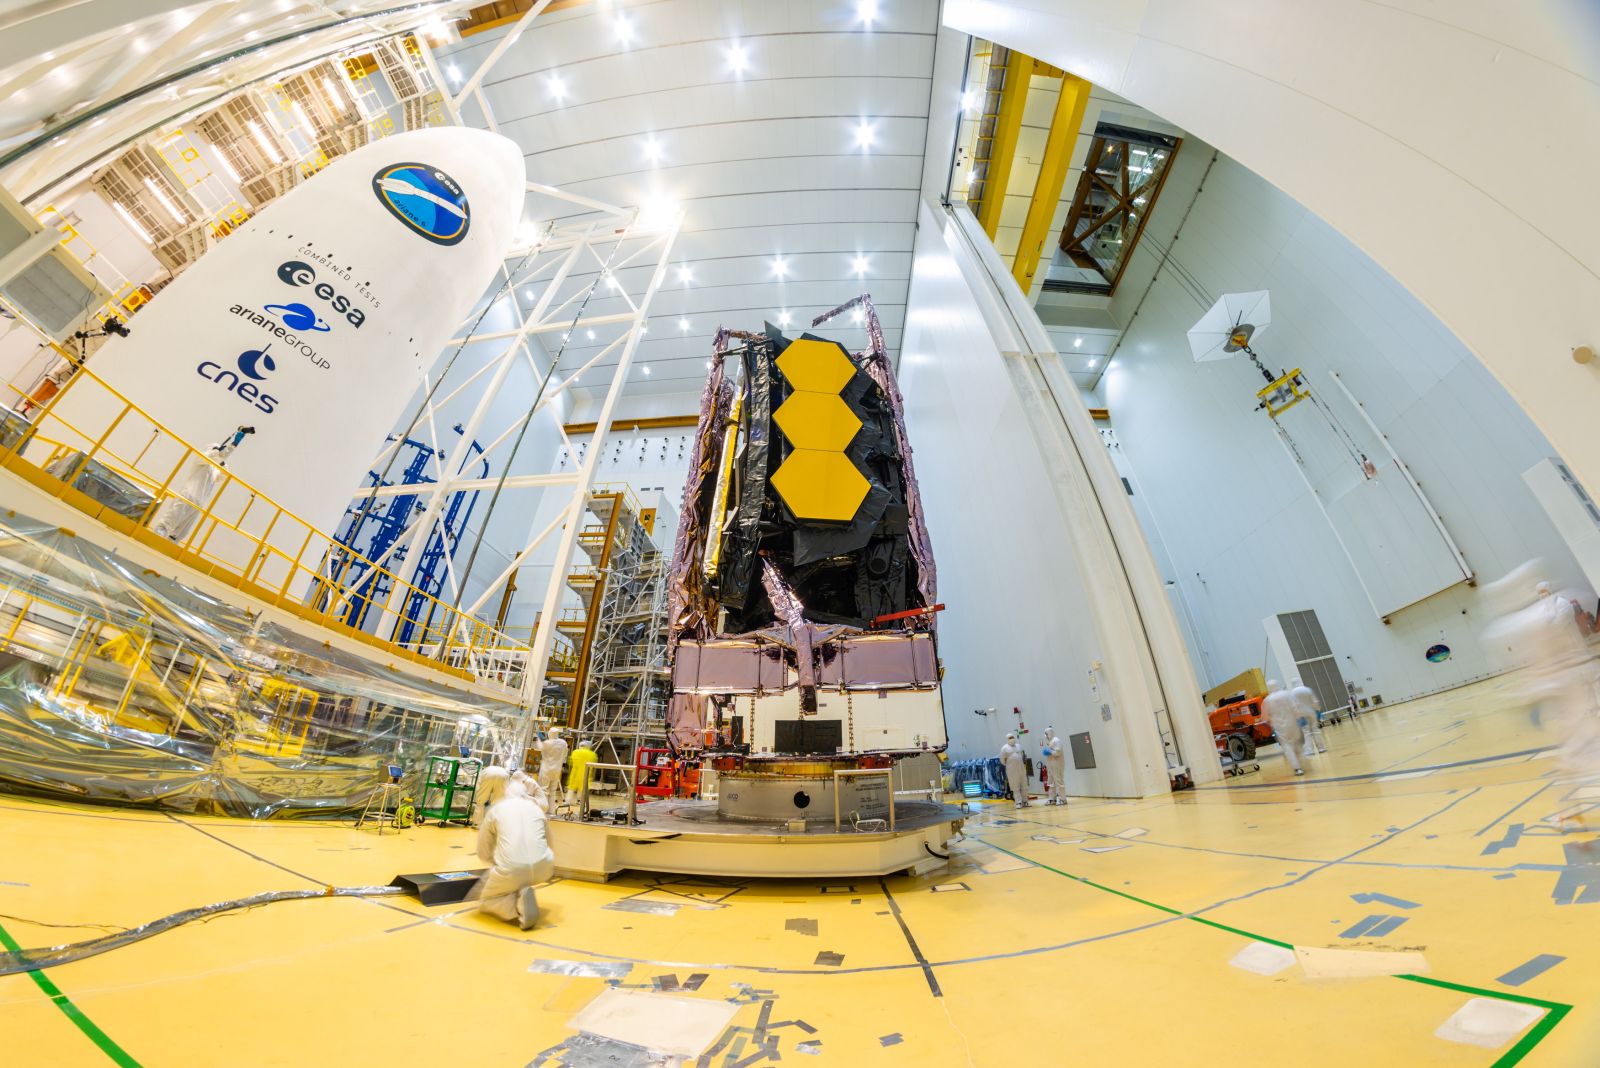 epa09648334 A handout picture made available by the European Space Agency (ESA) shows NASA's James Webb Space Telescope being secured on top of the Ariane 5 rocket that will launch it to space from Europe's Spaceport in Kourou, French Guiana, 11 December 2021 (issued 18 December 2021). The National Aeronautics and Space Administration (NASA) announced that The James Webb Space Telescope (JWST) is confirmed for the target launch date of 24 December 2021, at 7:20 a.m. EST (13:20 CET). Webb is an international partnership between NASA, ESA, and the Canadian Space Agency (CSA). Webb's primary mirror will collect light for the observatory in the scientific quest to better understand our solar system and beyond.  EPA/ESA/MANUEL PEDOUSSAUT HANDOUT  HANDOUT EDITORIAL USE ONLY/NO SALES